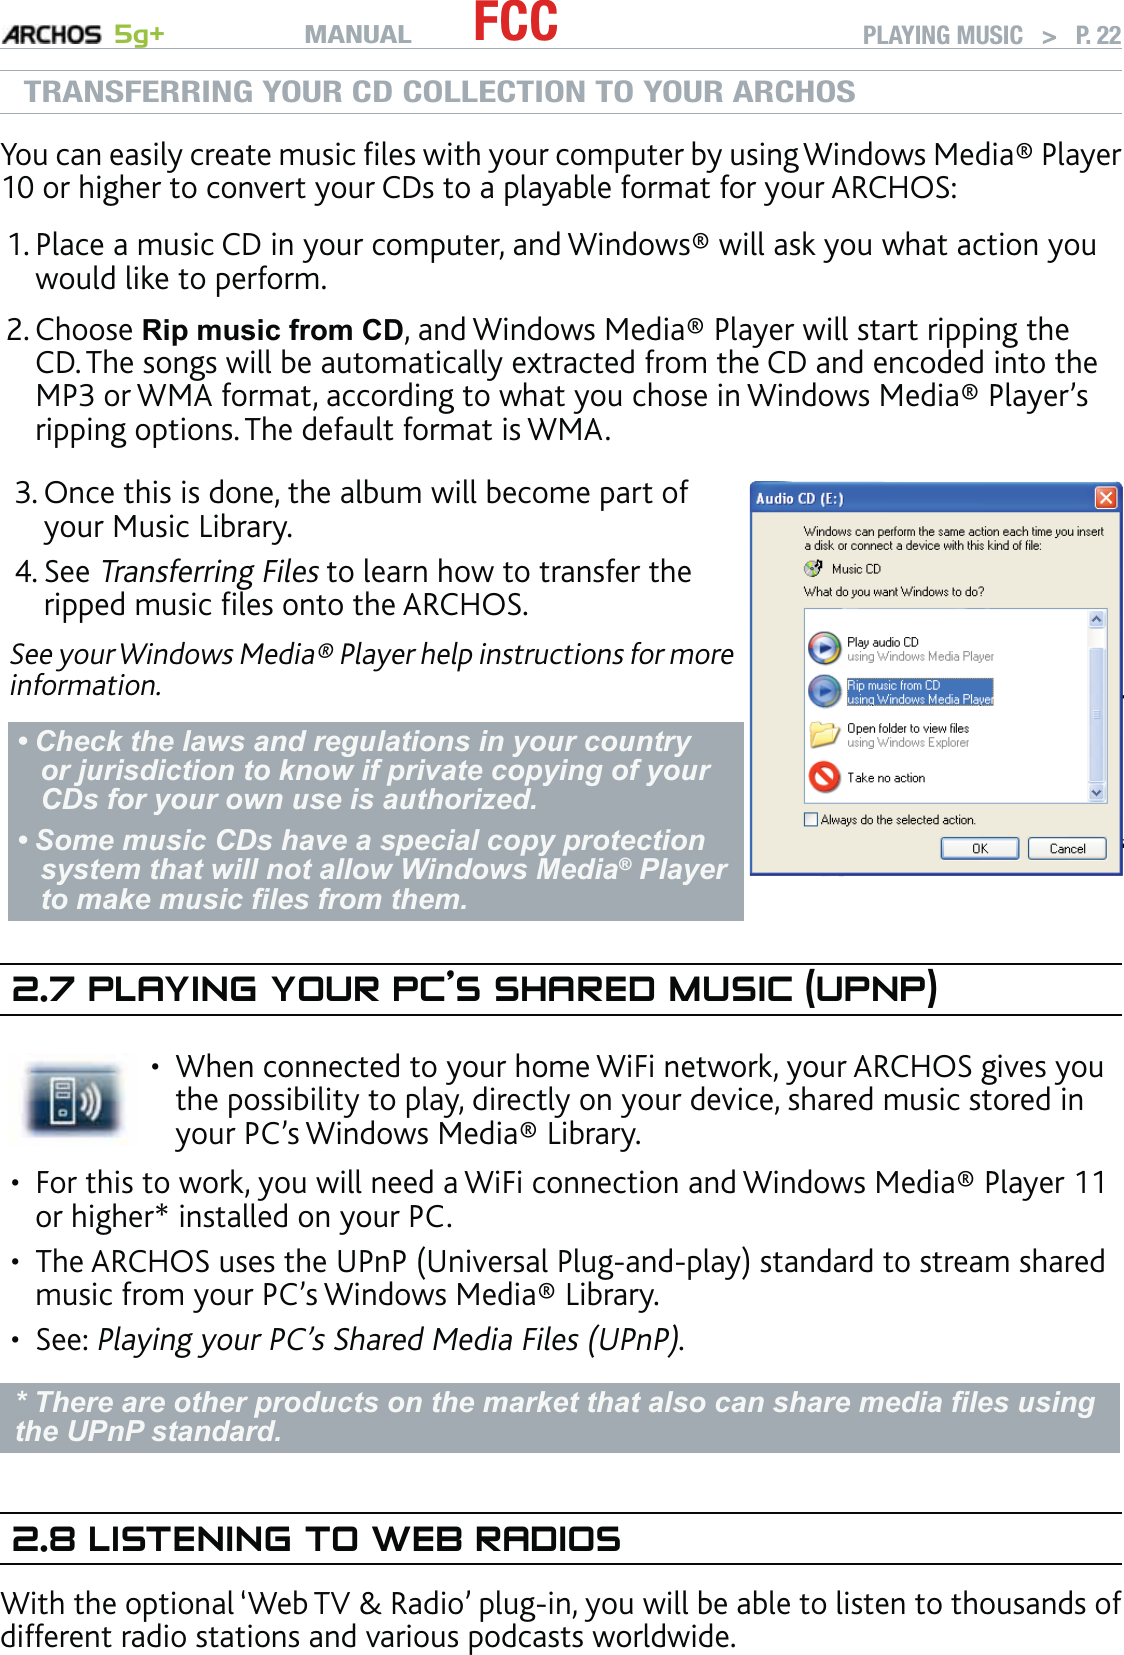 MANUAL 5g+ FCC PLAYING MUSIC   &gt;   P. 22TRANSFERRING YOUR CD COLLECTION TO YOUR ARCHOSYou can easily create music ﬁles with your computer by using Windows Media® Player 10 or higher to convert your CDs to a playable format for your ARCHOS: Place a music CD in your computer, and Windows® will ask you what action you would like to perform. Choose Rip music from CD, and Windows Media® Player will start ripping the CD. The songs will be automatically extracted from the CD and encoded into the MP3 or WMA format, according to what you chose in Windows Media® Player’s ripping options. The default format is WMA.Once this is done, the album will become part of your Music Library. See Transferring Files to learn how to transfer the ripped music ﬁles onto the ARCHOS.See your Windows Media® Player help instructions for more information.Check the laws and regulations in your country or jurisdiction to know if private copying of your CDs for your own use is authorized. Some music CDs have a special copy protection system that will not allow Windows Media® Player to make music ﬁles from them.••3.4.2.7 PLAYING YOUR PC’S SHARED MUSIC (UPNP)When connected to your home WiFi network, your ARCHOS gives you the possibility to play, directly on your device, shared music stored in your PC’s Windows Media® Library. •For this to work, you will need a WiFi connection and Windows Media® Player 11 or higher* installed on your PC. The ARCHOS uses the UPnP (Universal Plug-and-play) standard to stream shared music from your PC’s Windows Media® Library.See: Playing your PC’s Shared Media Files (UPnP). * There are other products on the market that also can share media ﬁles using the UPnP standard.2.8 LISTENING TO WEB RADIOSWith the optional ‘Web TV &amp; Radio’ plug-in, you will be able to listen to thousands of different radio stations and various podcasts worldwide.1.2.•••